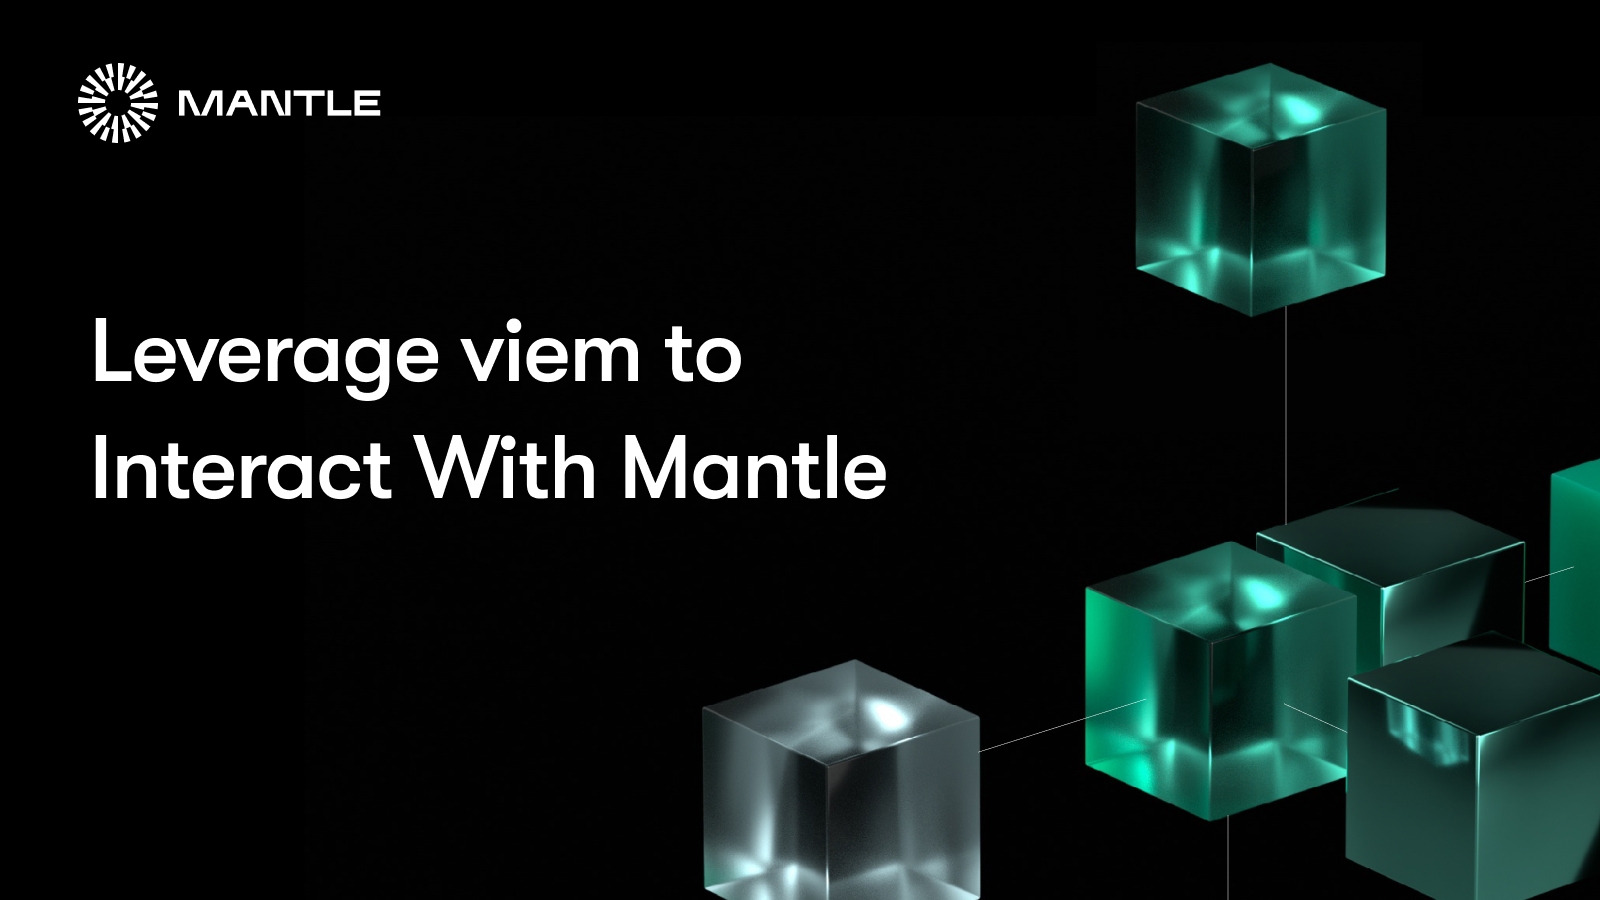 Interacting with Mantle using viem